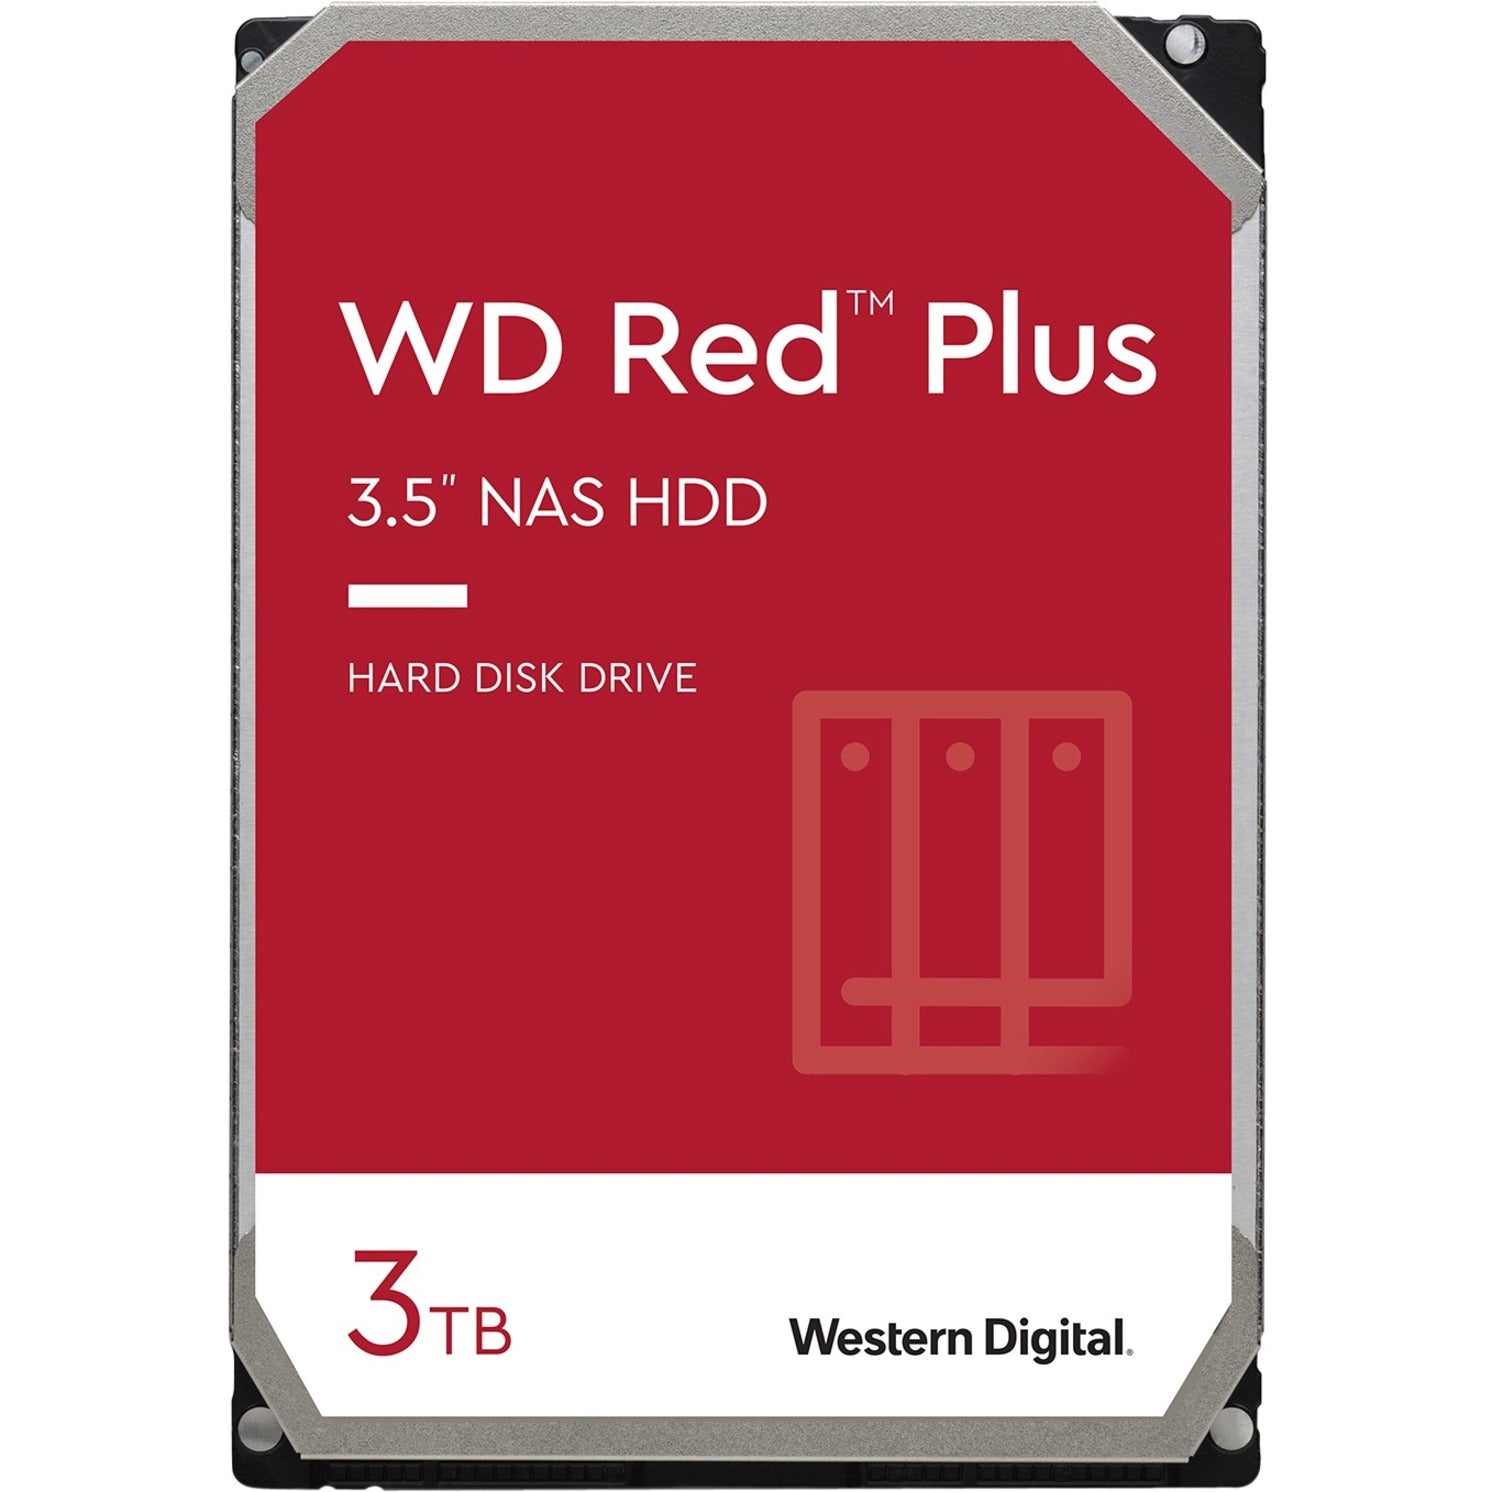 WD-IMSourcing RED 3TB INTELLIPOWER SATA 3.5IN DISC PROD SPCL SOURCING SEE NOTES (WD30EFRX)